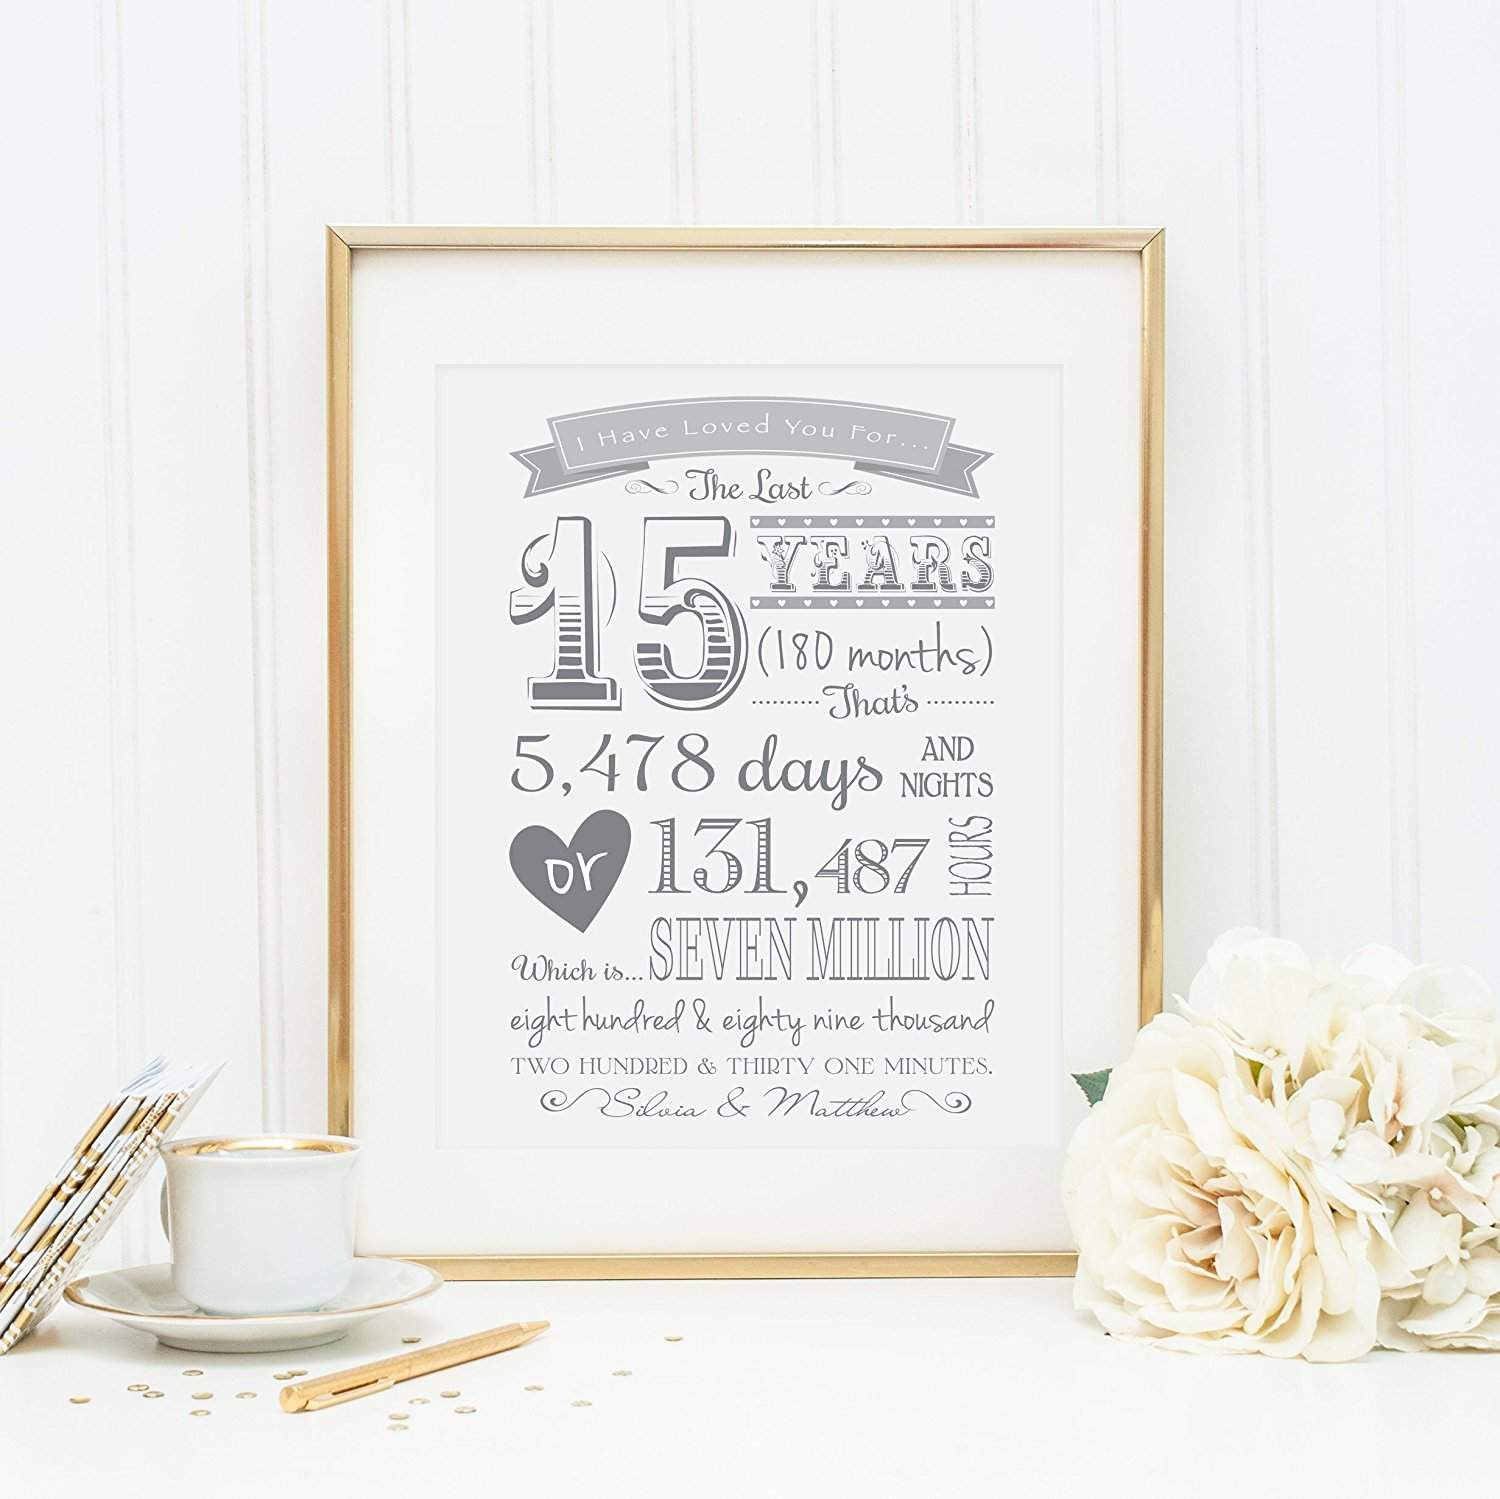 Groom To Bride Wedding Gift
 Best Wedding Day Gift Ideas From the Groom to the Bride